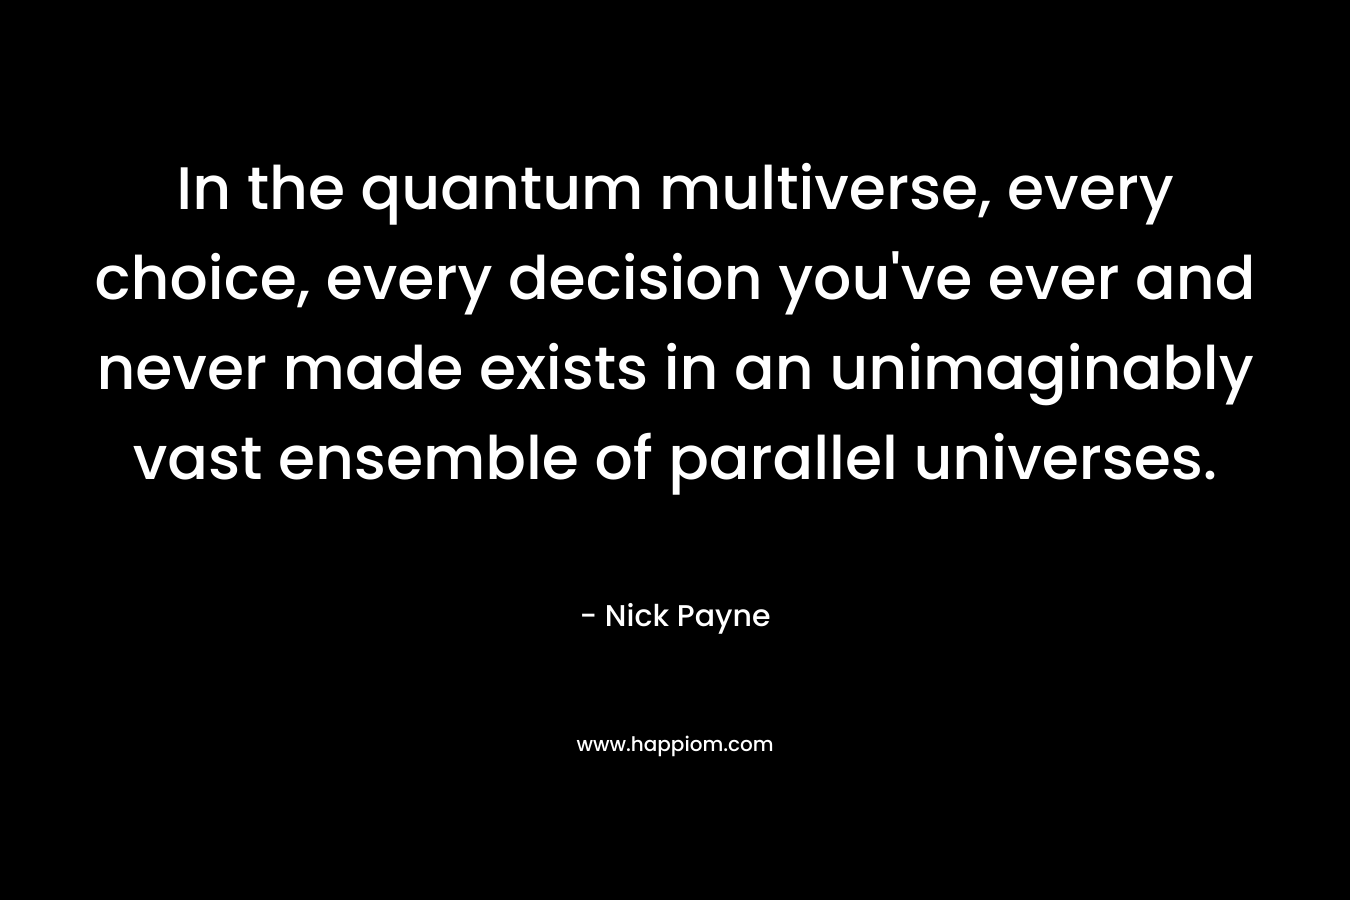 In the quantum multiverse, every choice, every decision you’ve ever and never made exists in an unimaginably vast ensemble of parallel universes. – Nick Payne